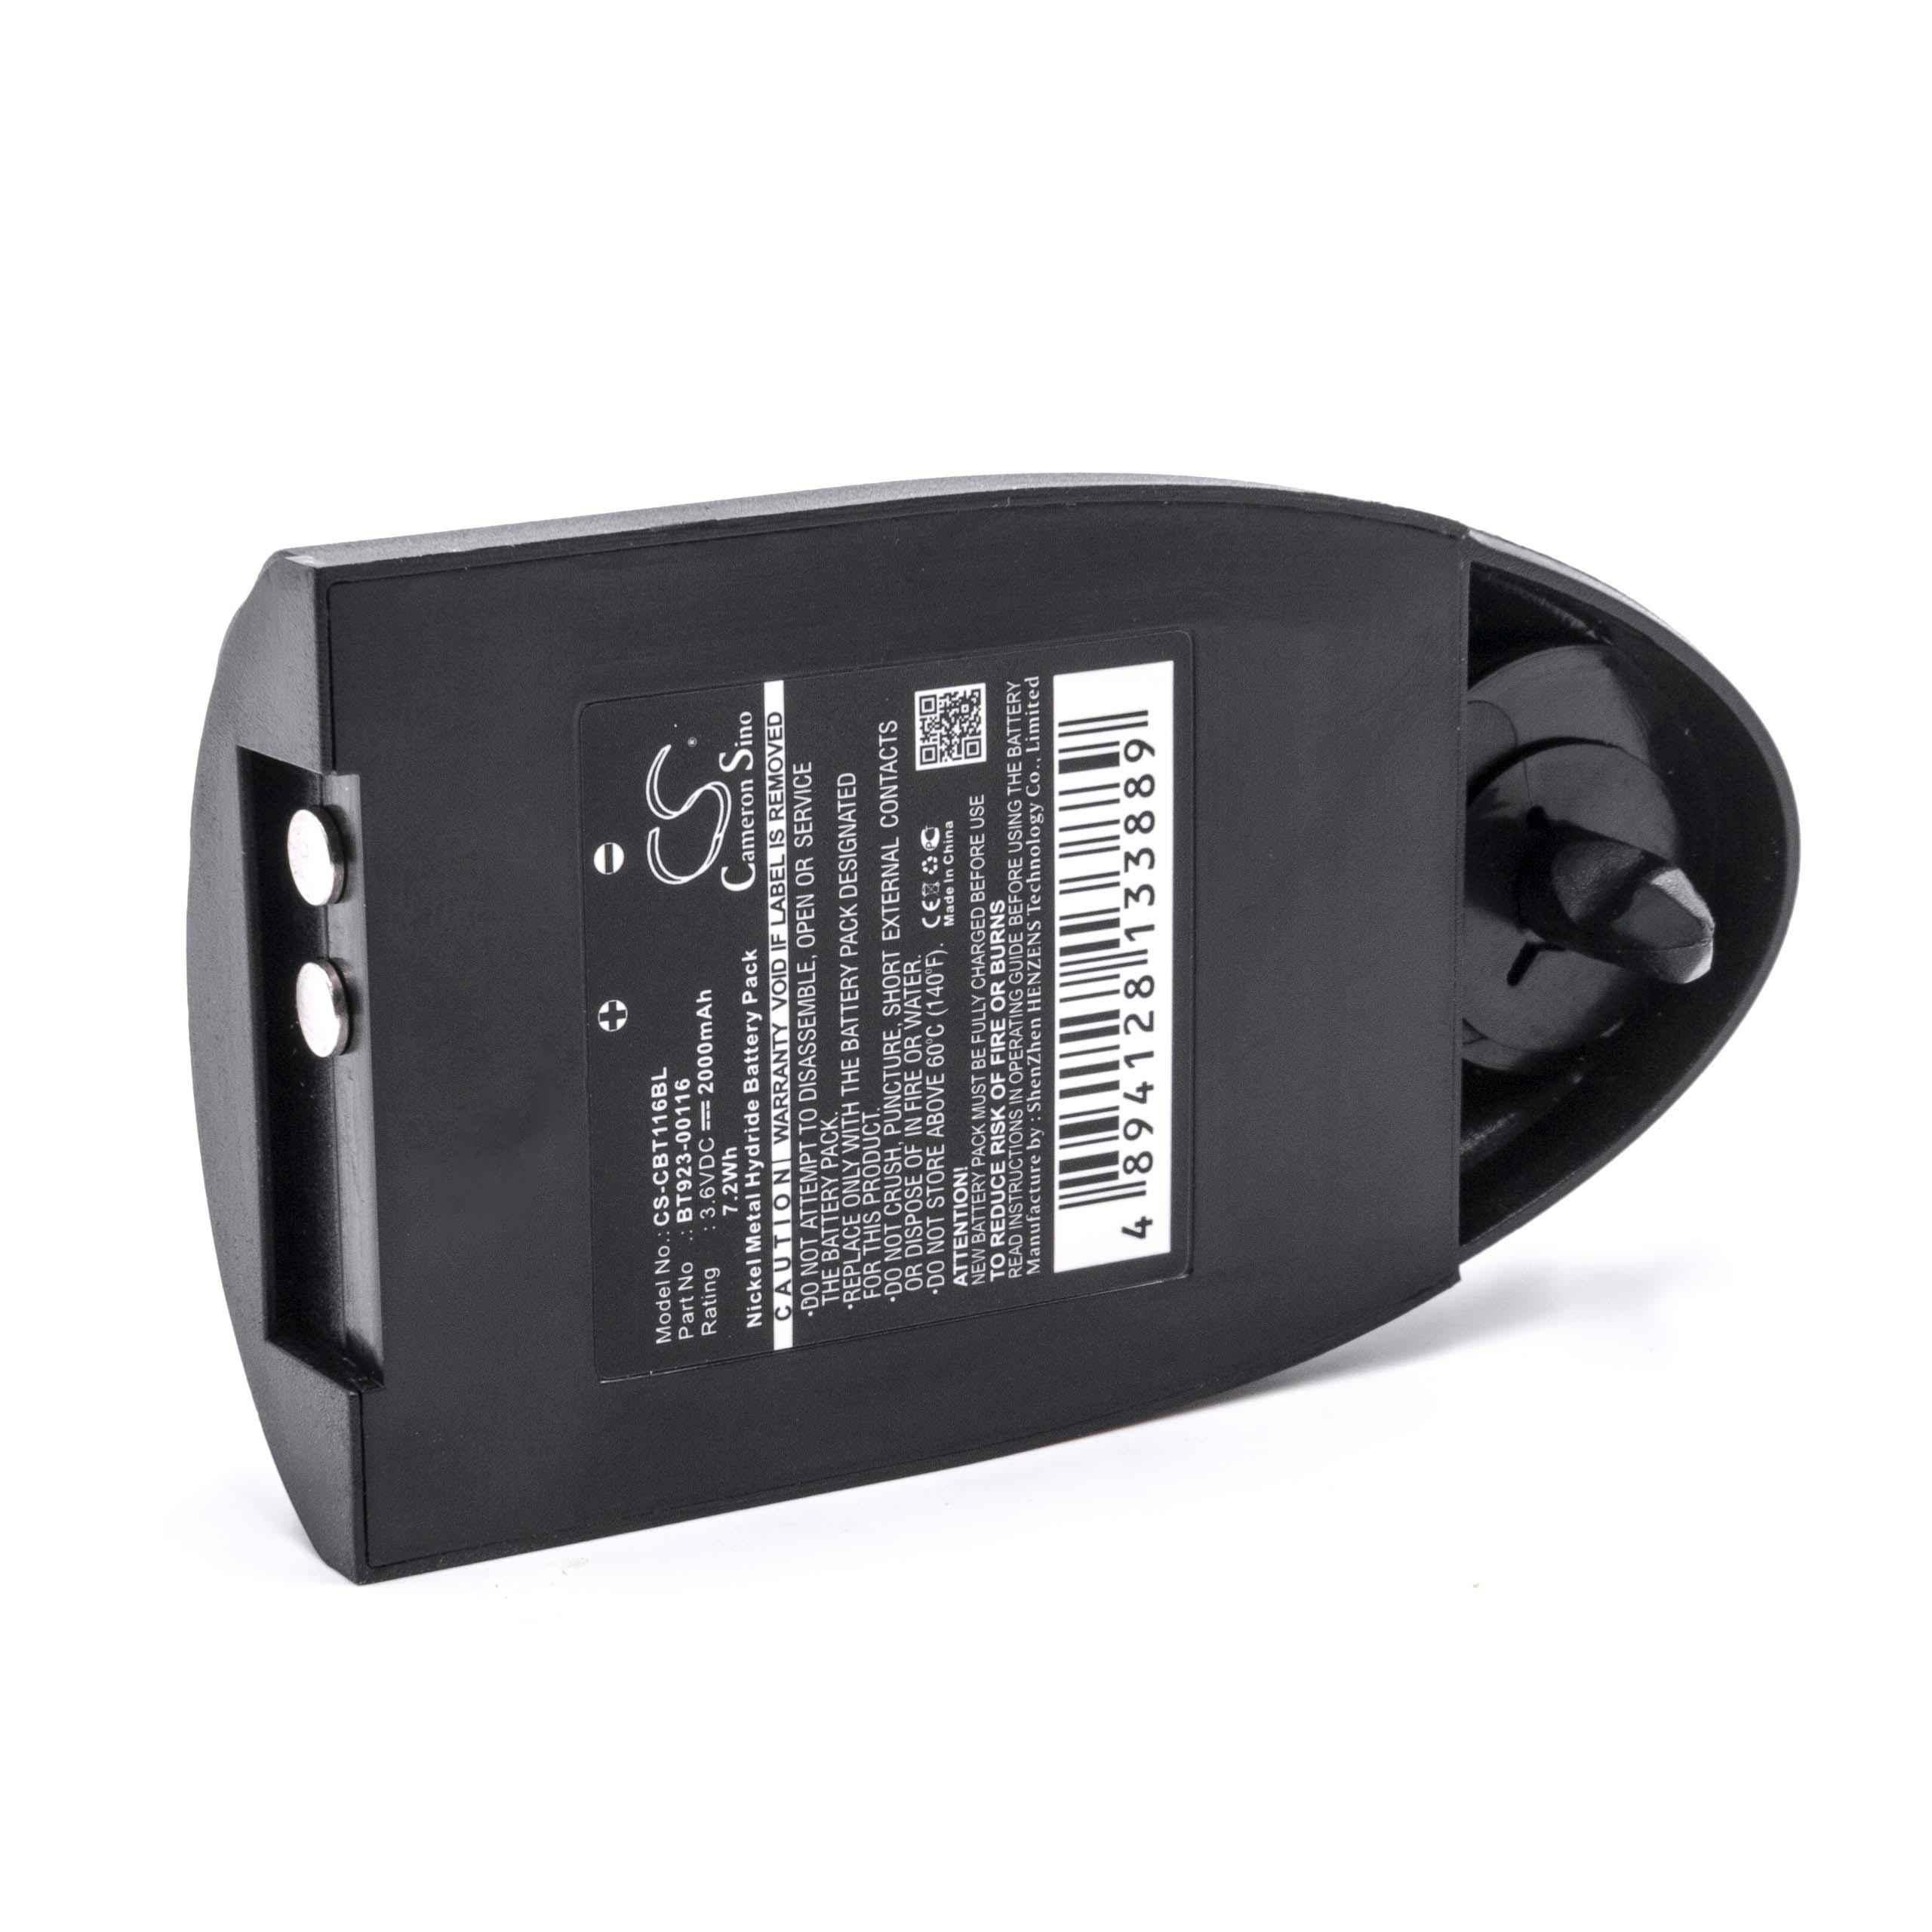 Industrial Remote Control Battery Replacement for Cattron Theimeg BAT-0000327 - 2000mAh 3.6V NiMH